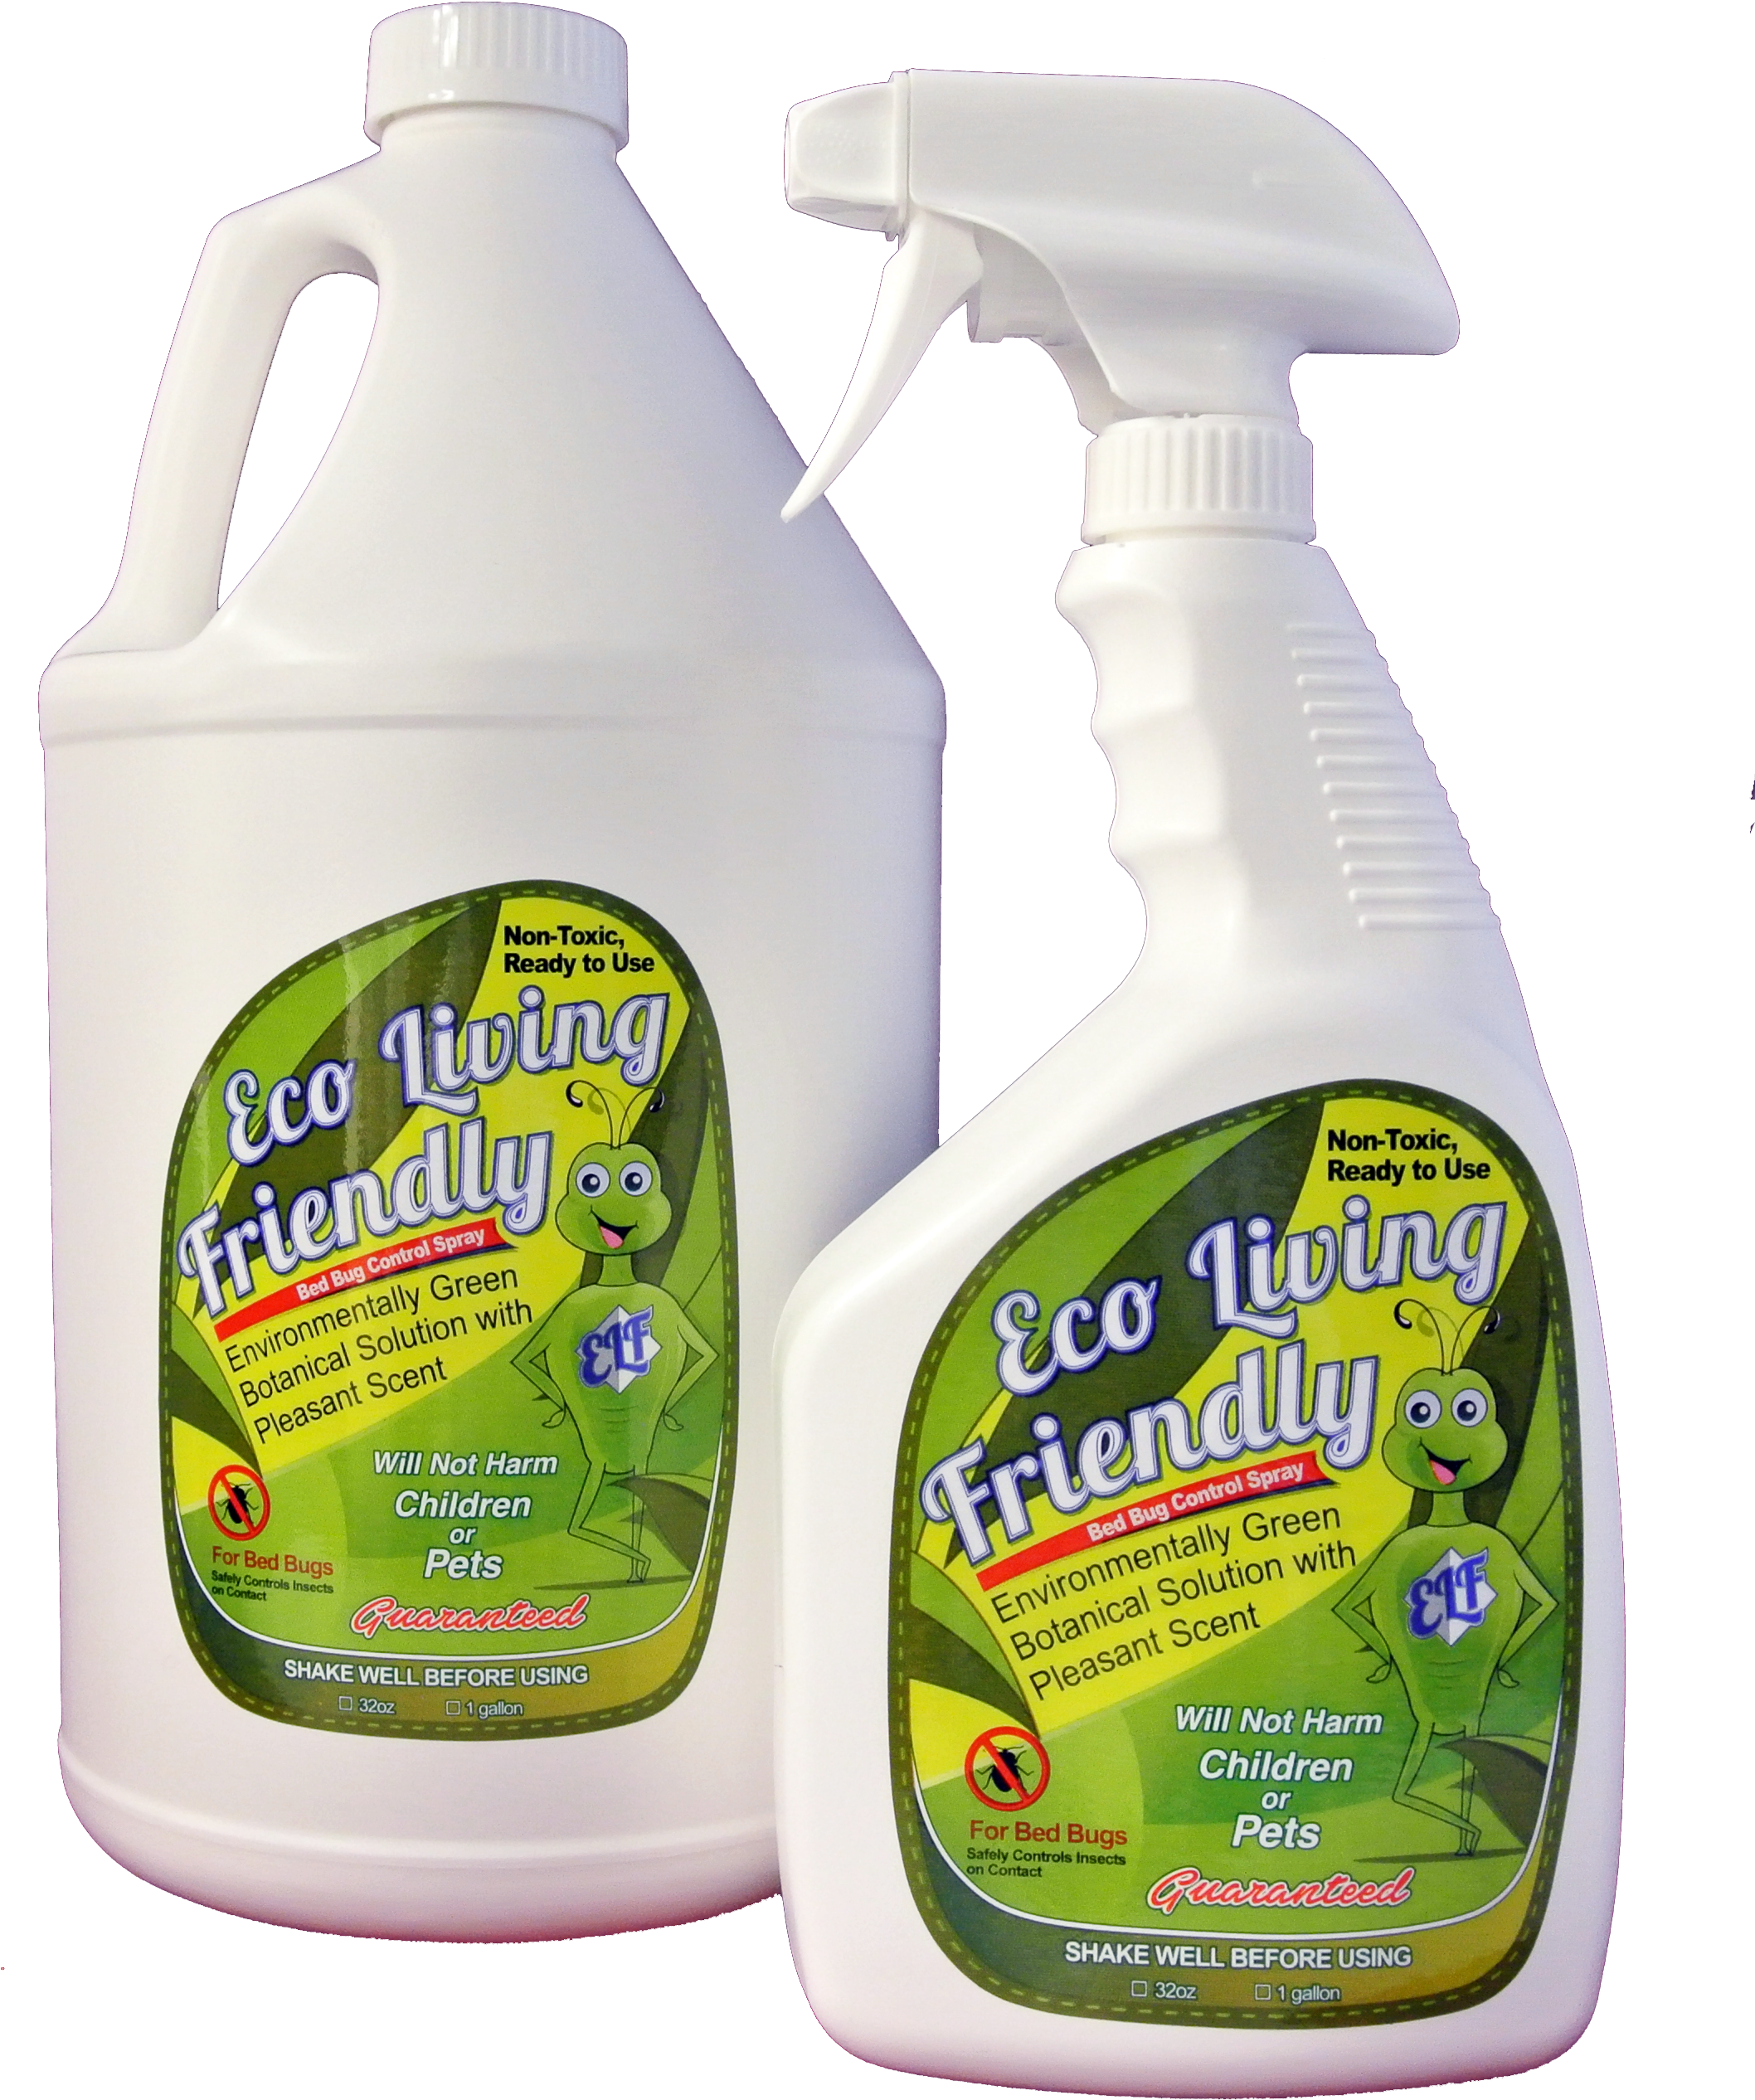 Eco Living Friendly "elf 32" For Bed Bug Control Combo (2700x2760), Png Download